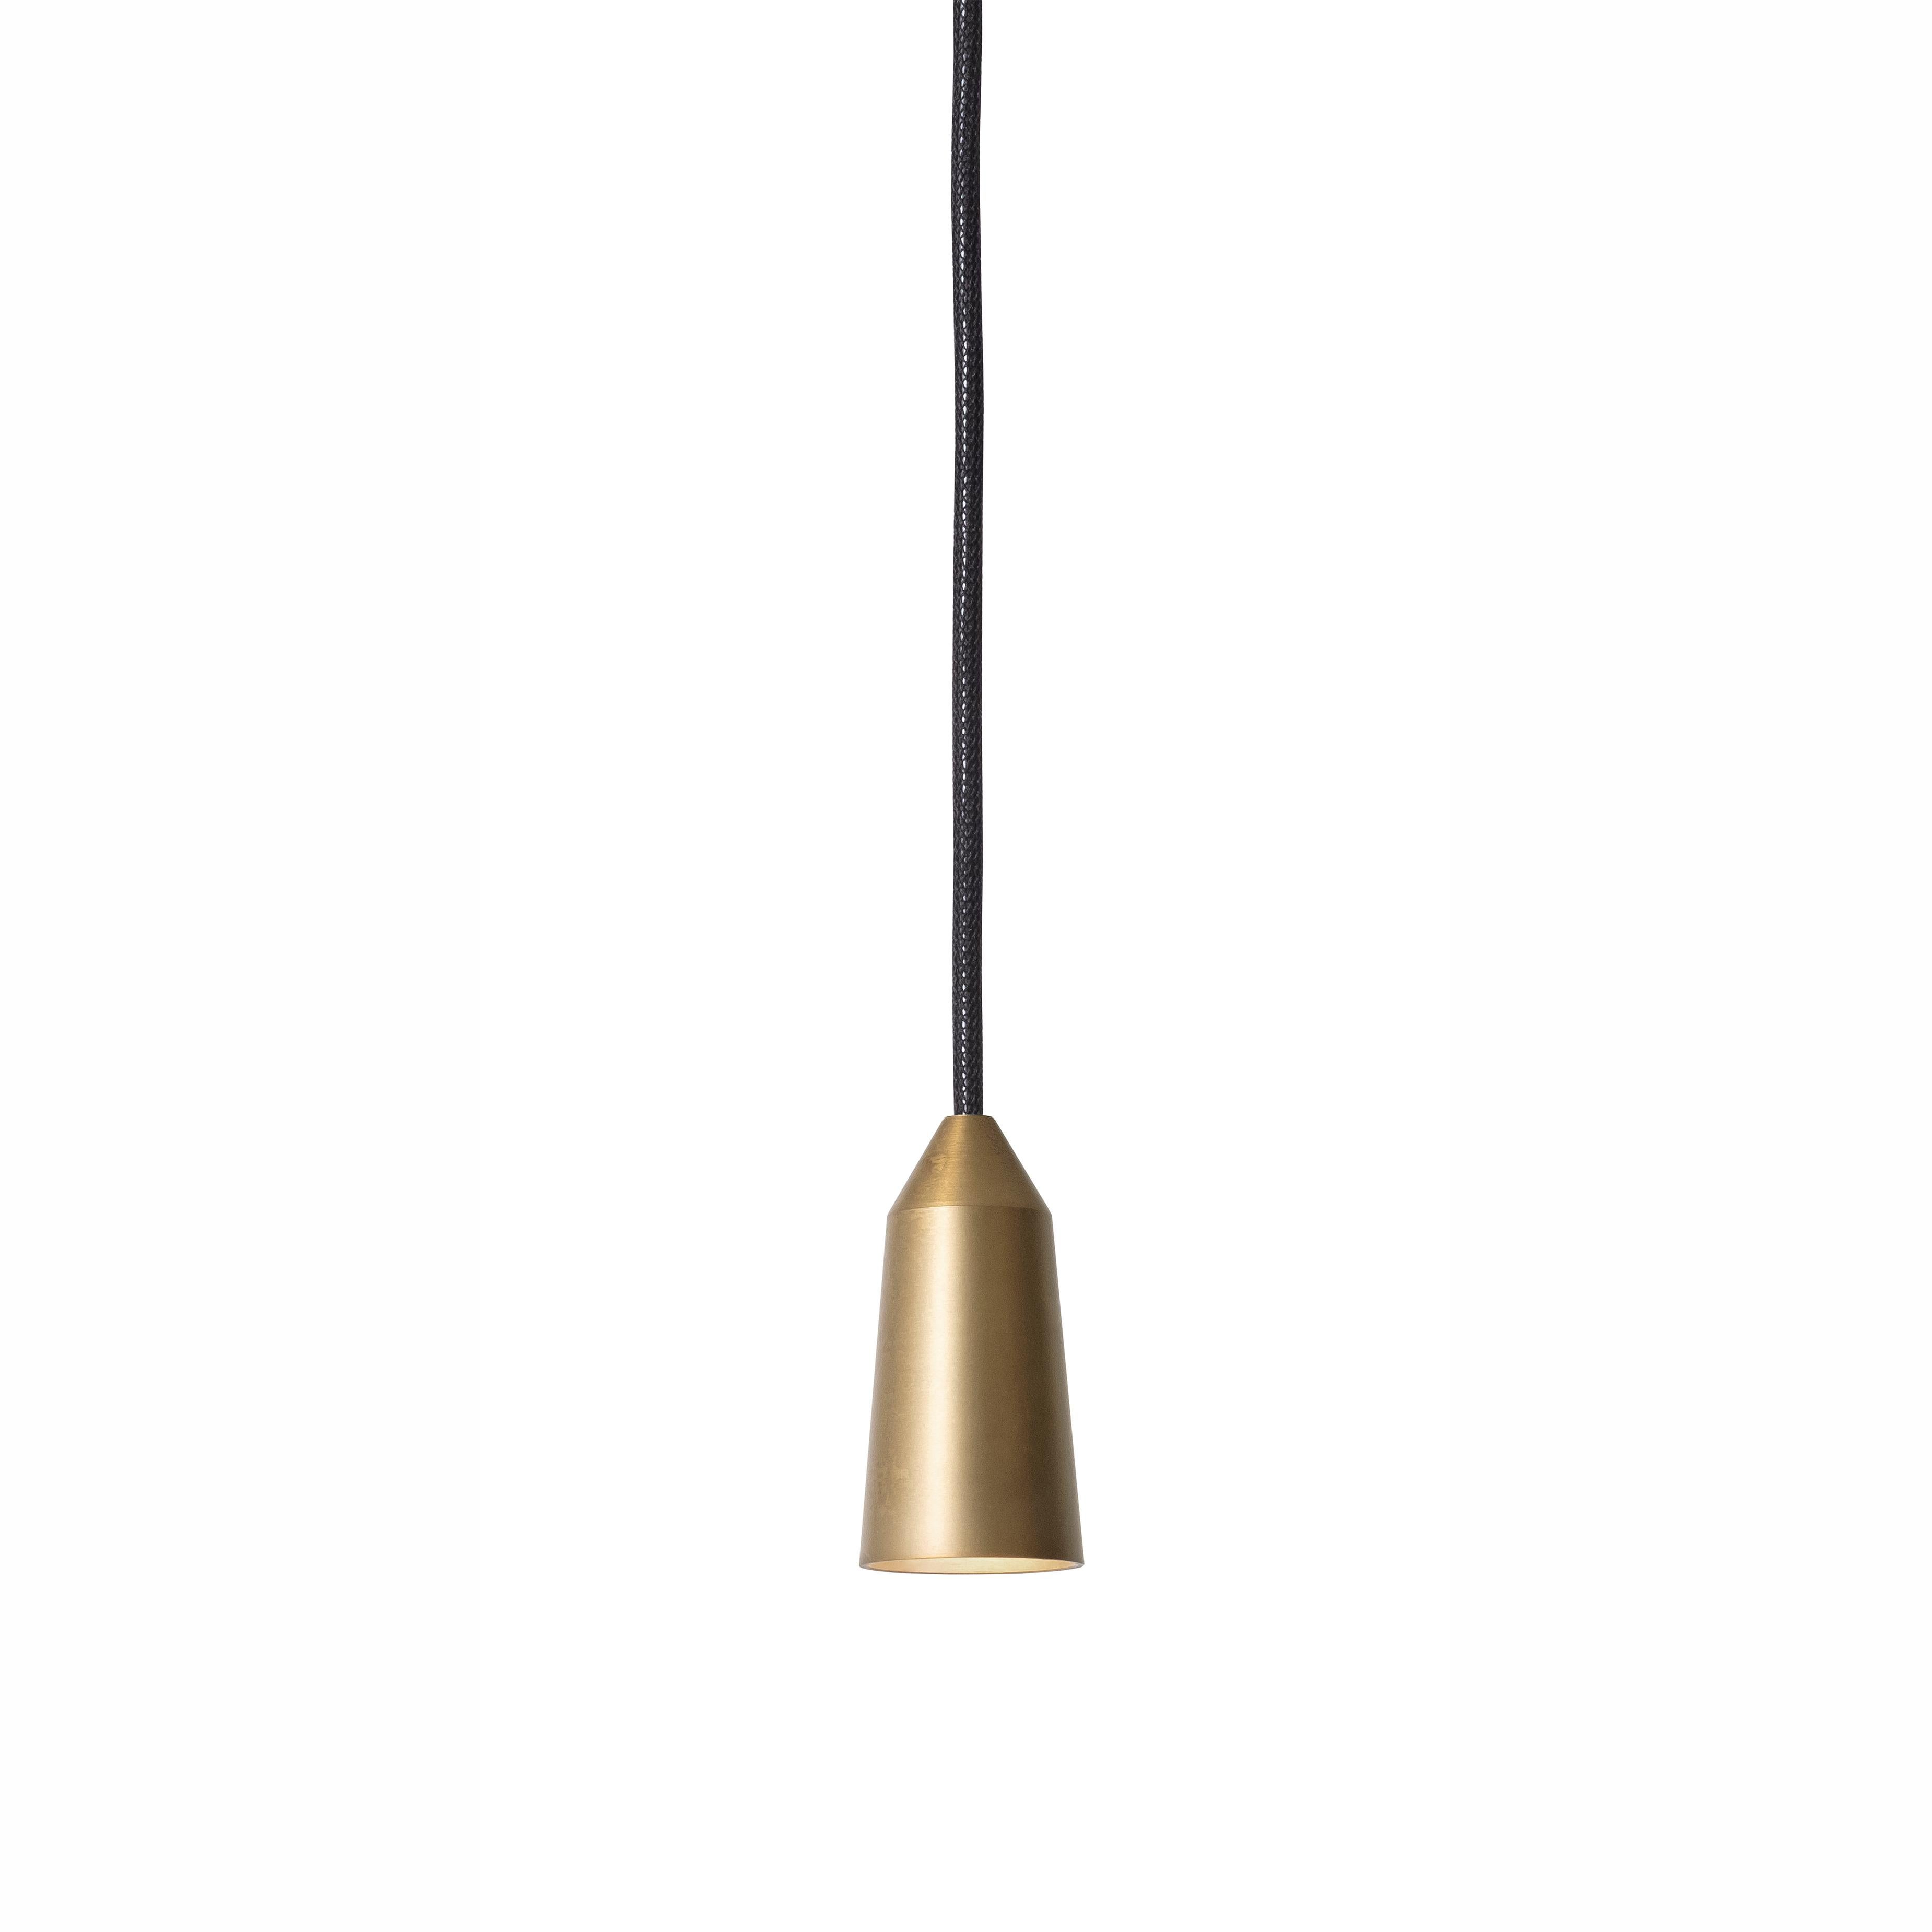 Ceiling lamp model 3492-6 Massiv Lamp by Henrik Tengler and manufactured by Konsthantverk.

The production of lamps, wall lights and floor lamps are manufactured using craftsman’s techniques with the same materials and techniques as the first